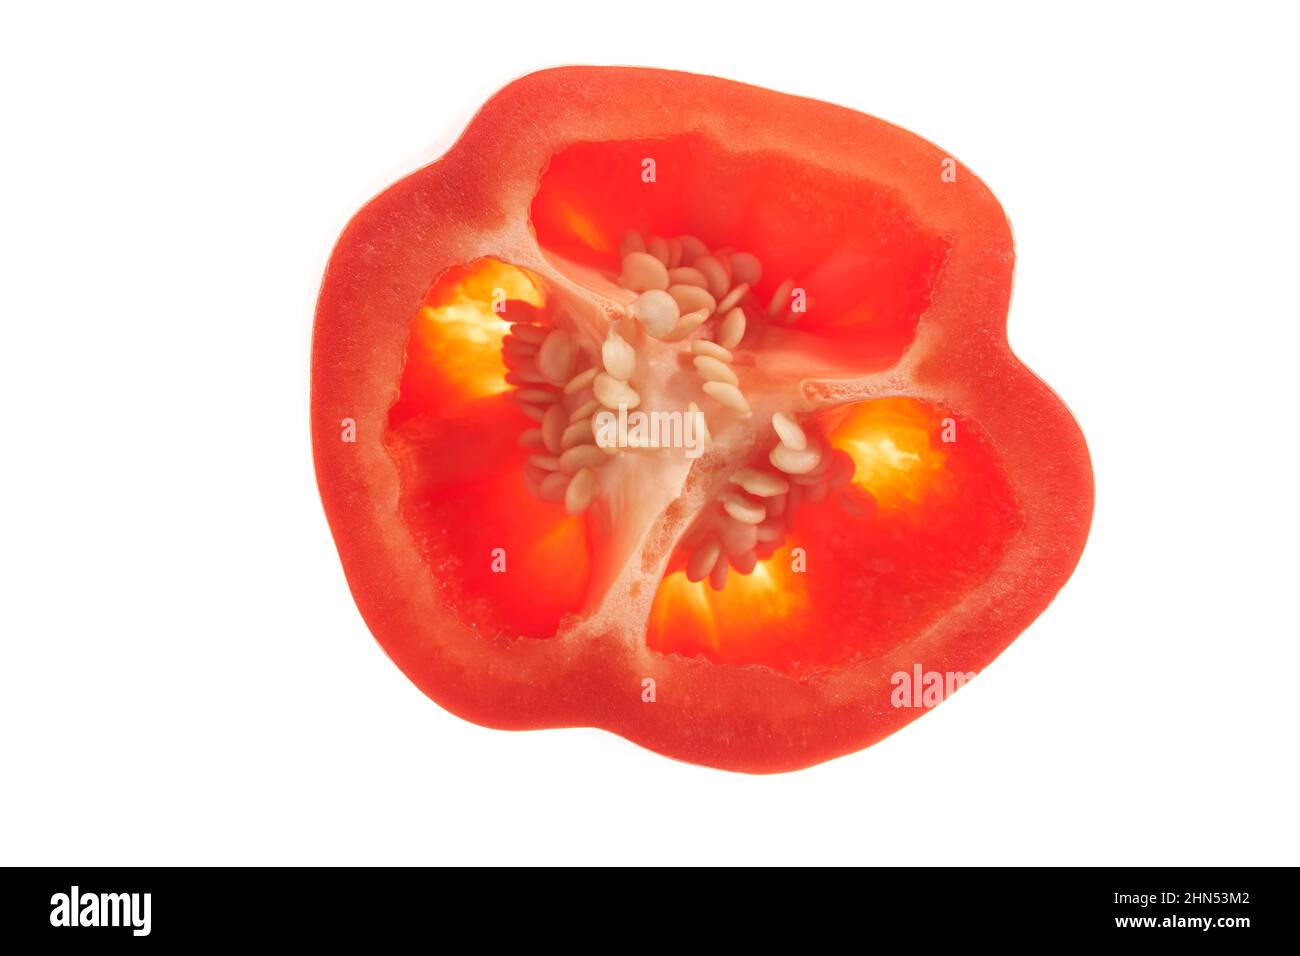 Isolated on a white background. Top view. Close-up of a piece of sweet red bell pepper with seeds inside. Detail of half a red pepper. High quality photo Stock Photo